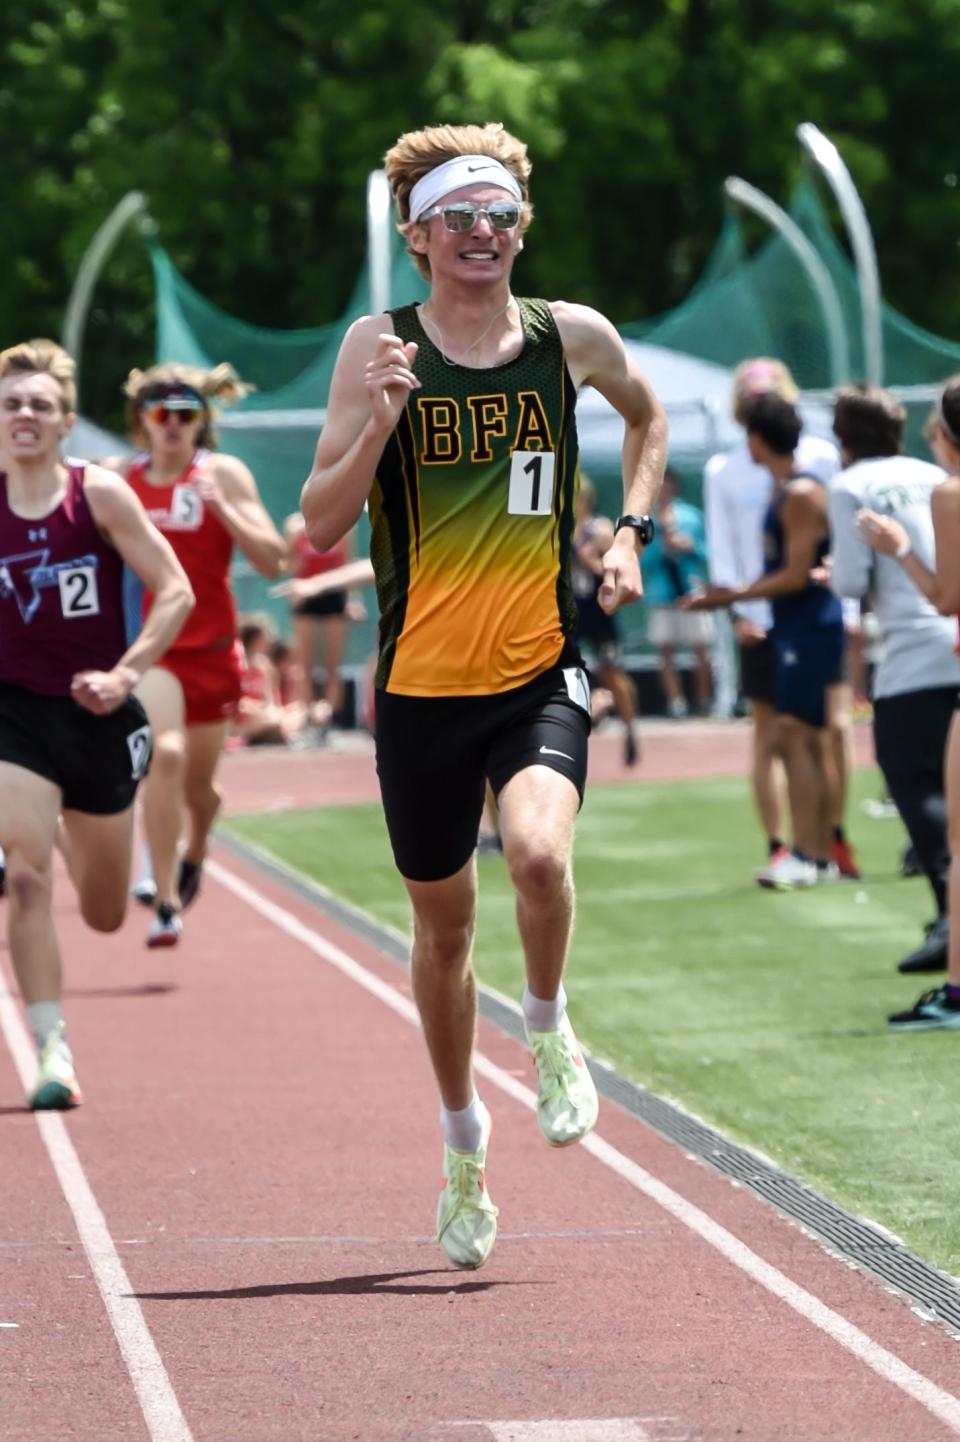 BFA's Ethan Mashtare wins the 800 meter run at the 2022 Vermont D1 State Track and Field Championships held at Burlington High School.